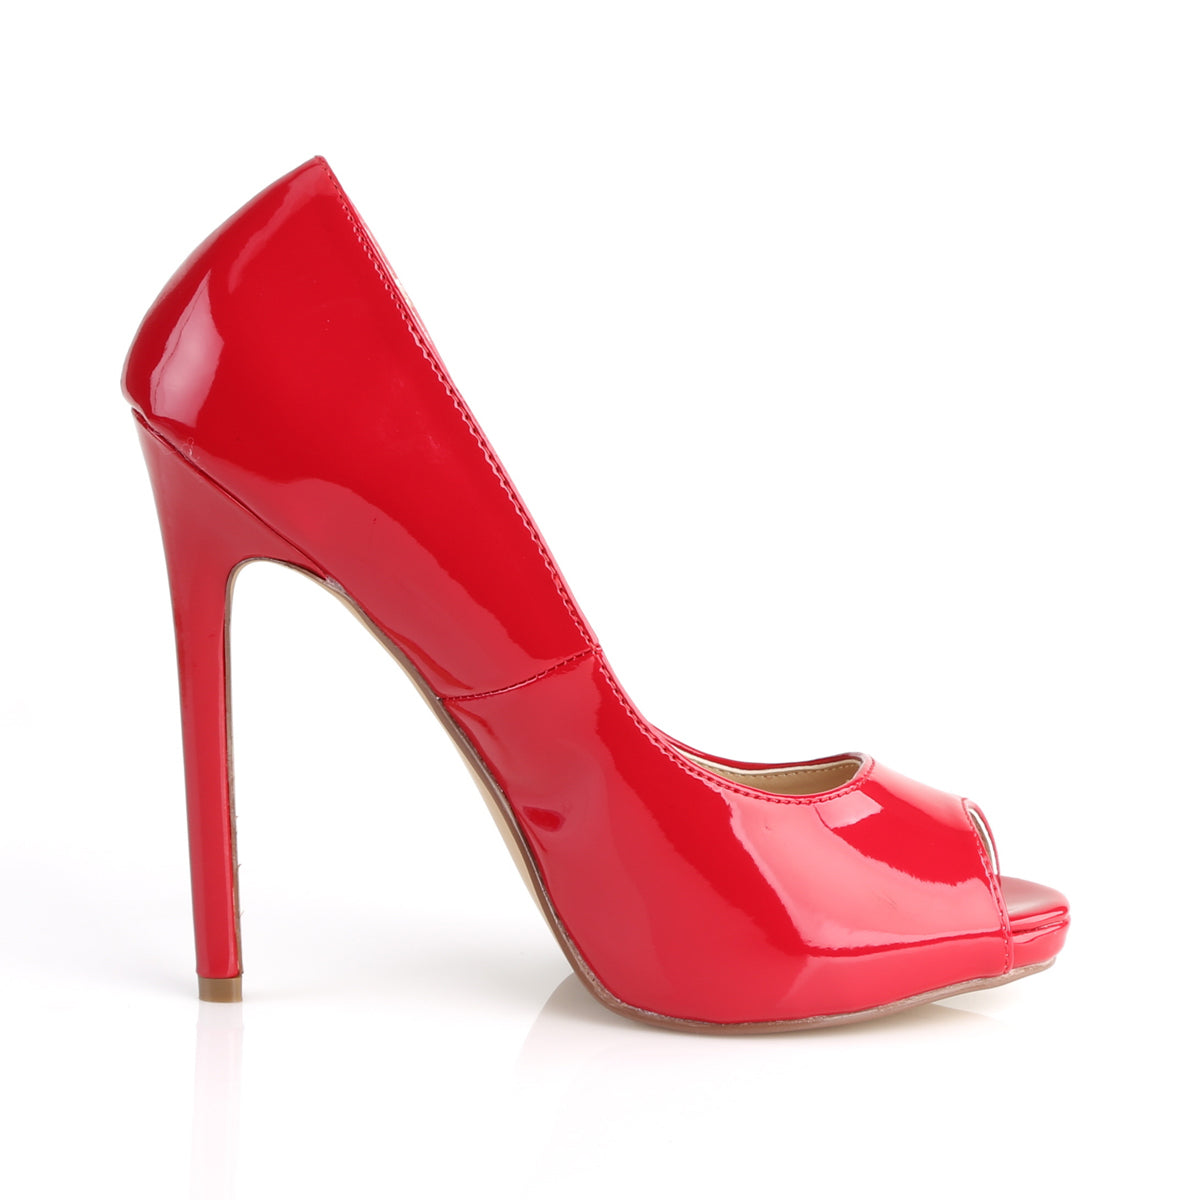 SEXY-42 Pleaser Shoes 5 Inch Heel Red Fetish Footwear-Pleaser- Sexy Shoes Fetish Heels